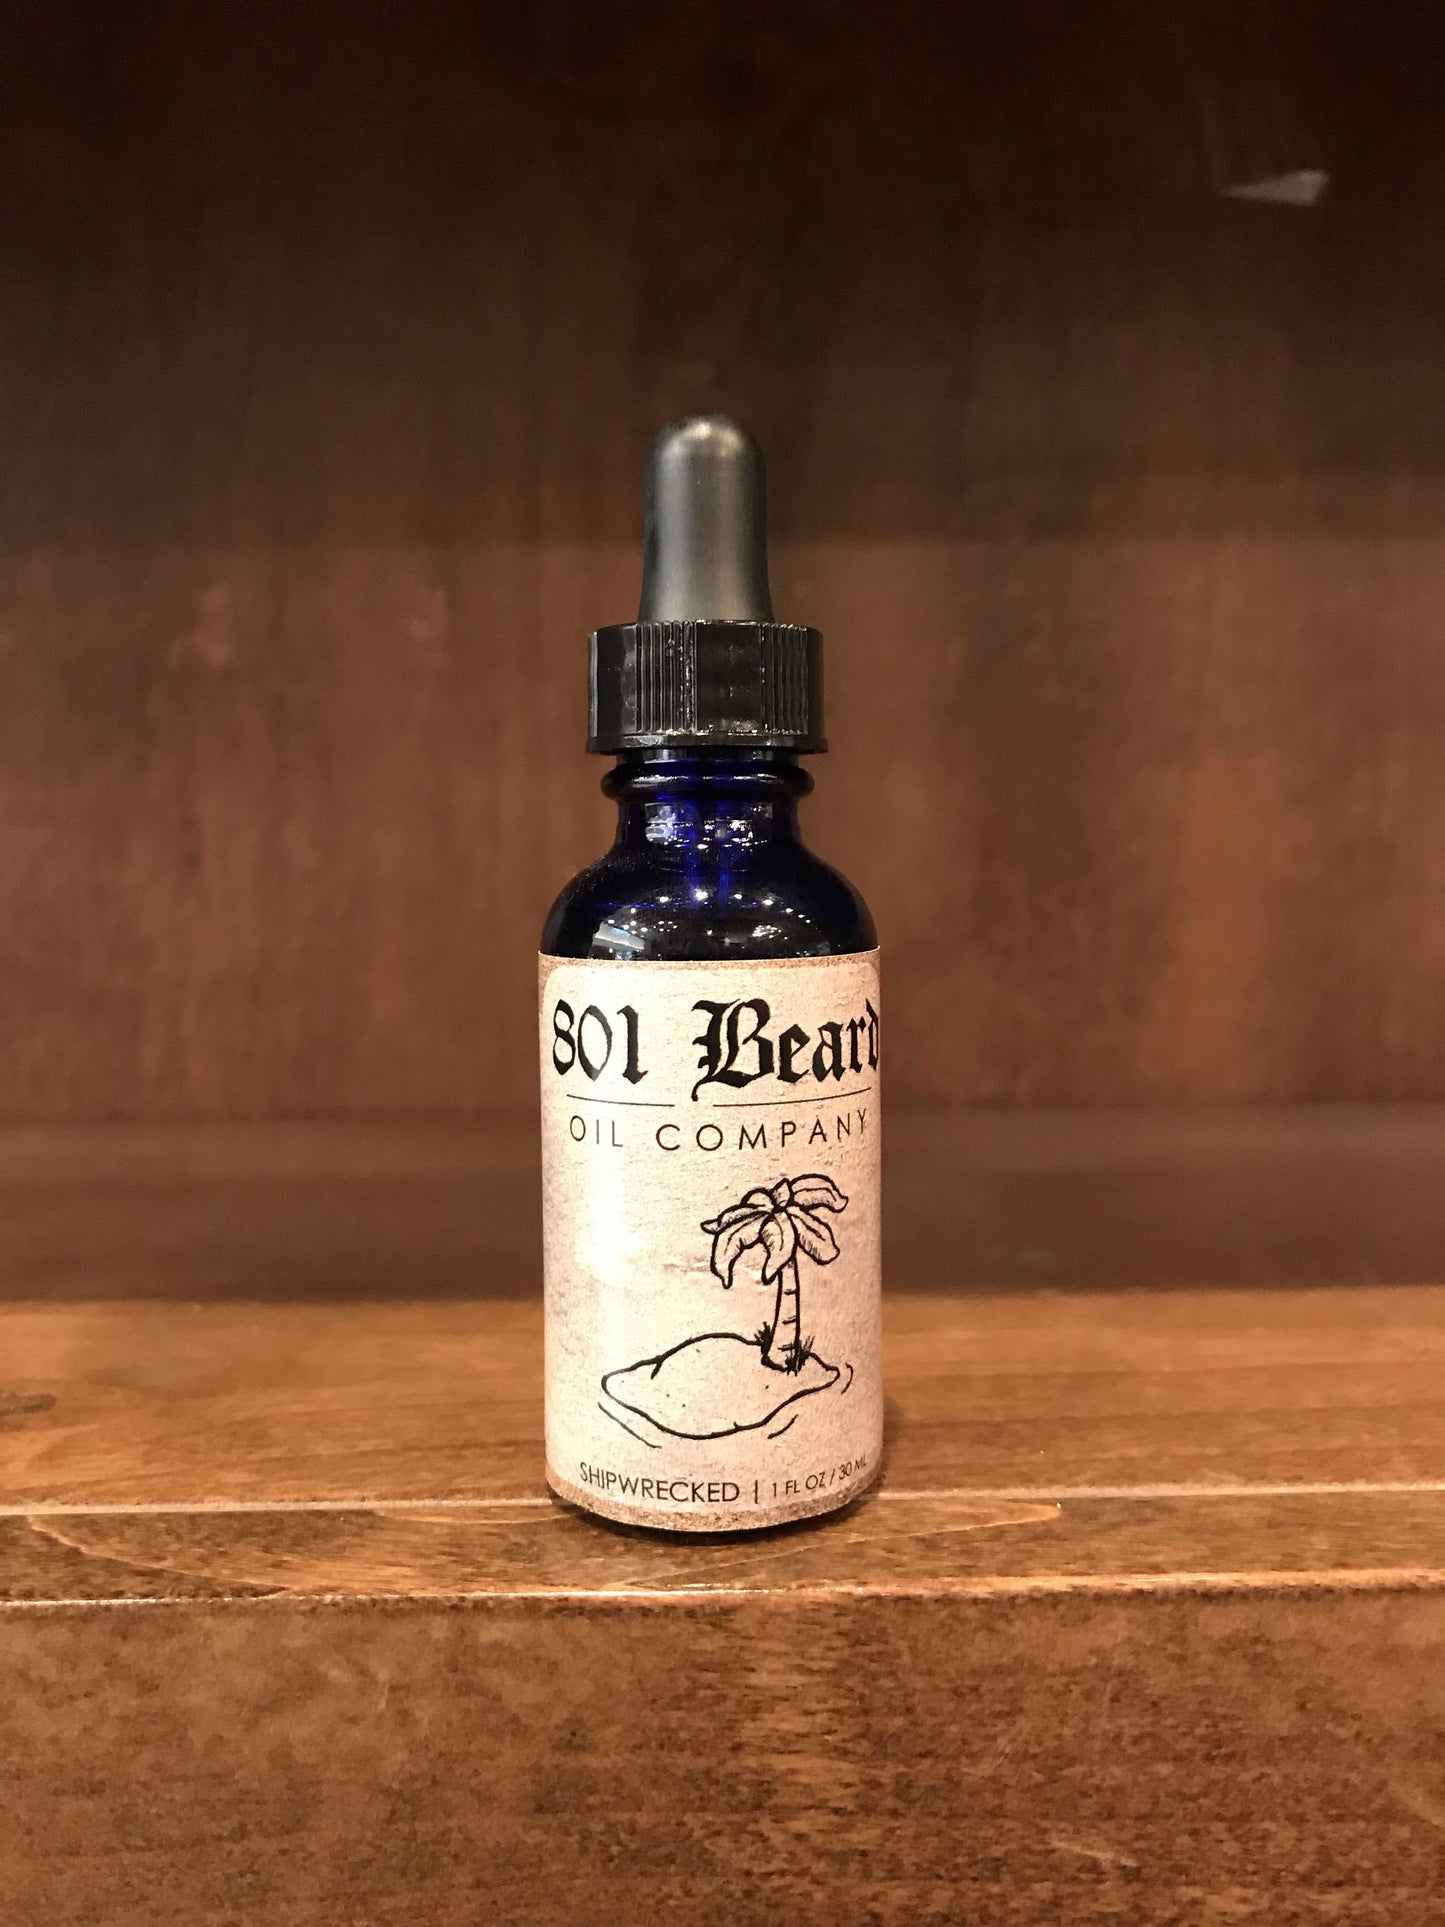 801 Beard Oil is rumored to be the best beard oil around. Not only will you enjoy the delectable fragrances of 801 Beard Oil, but you'll also get healthier skin, less itch, and a softer face mane. Men, your beard and skin will thank you for it. Trust us. For the men who want a longer, fuller and healthier beard with scents that invigorate and excite. Sold at Mini Moustachery, the all-in-one mens care, grooming, and barber supply depot.